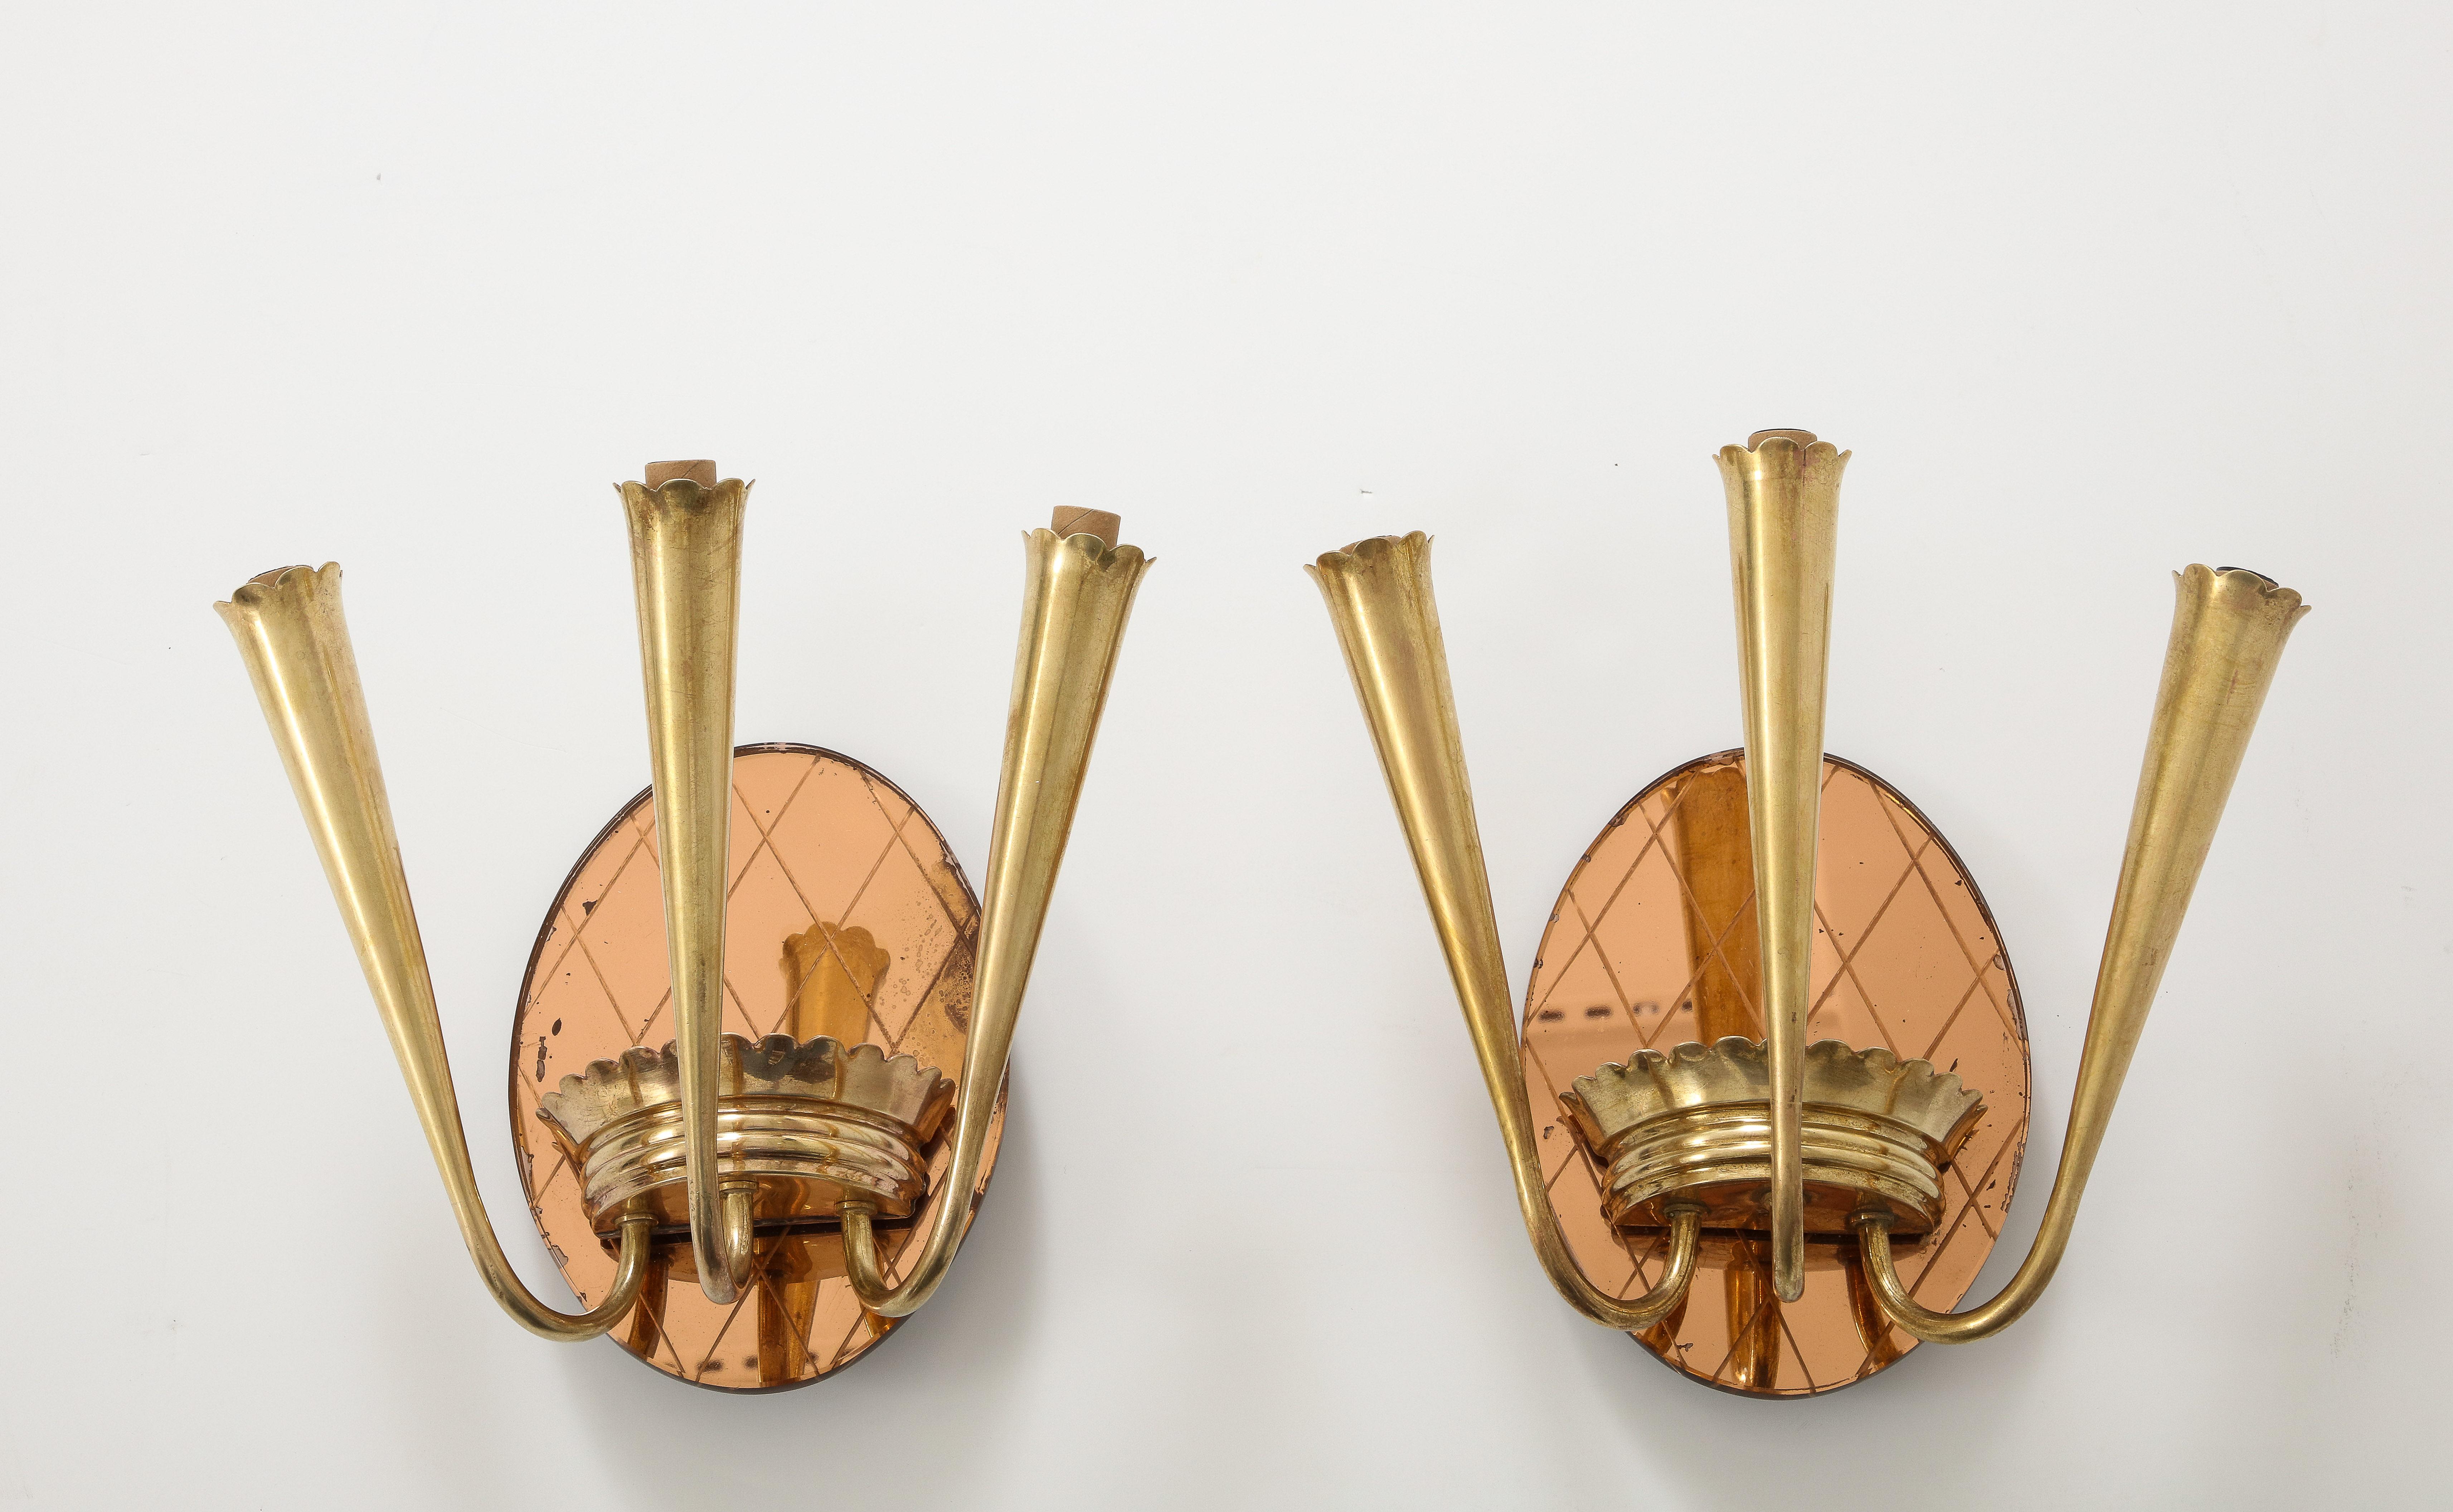 Pair of Italian 1930's wall sconces, the oval back plate in rose gold glass with cross-hatched design etched into the glass.  The plate supports a stylized brass structure with banded and scalloped motif from which three brass arms radiate upward